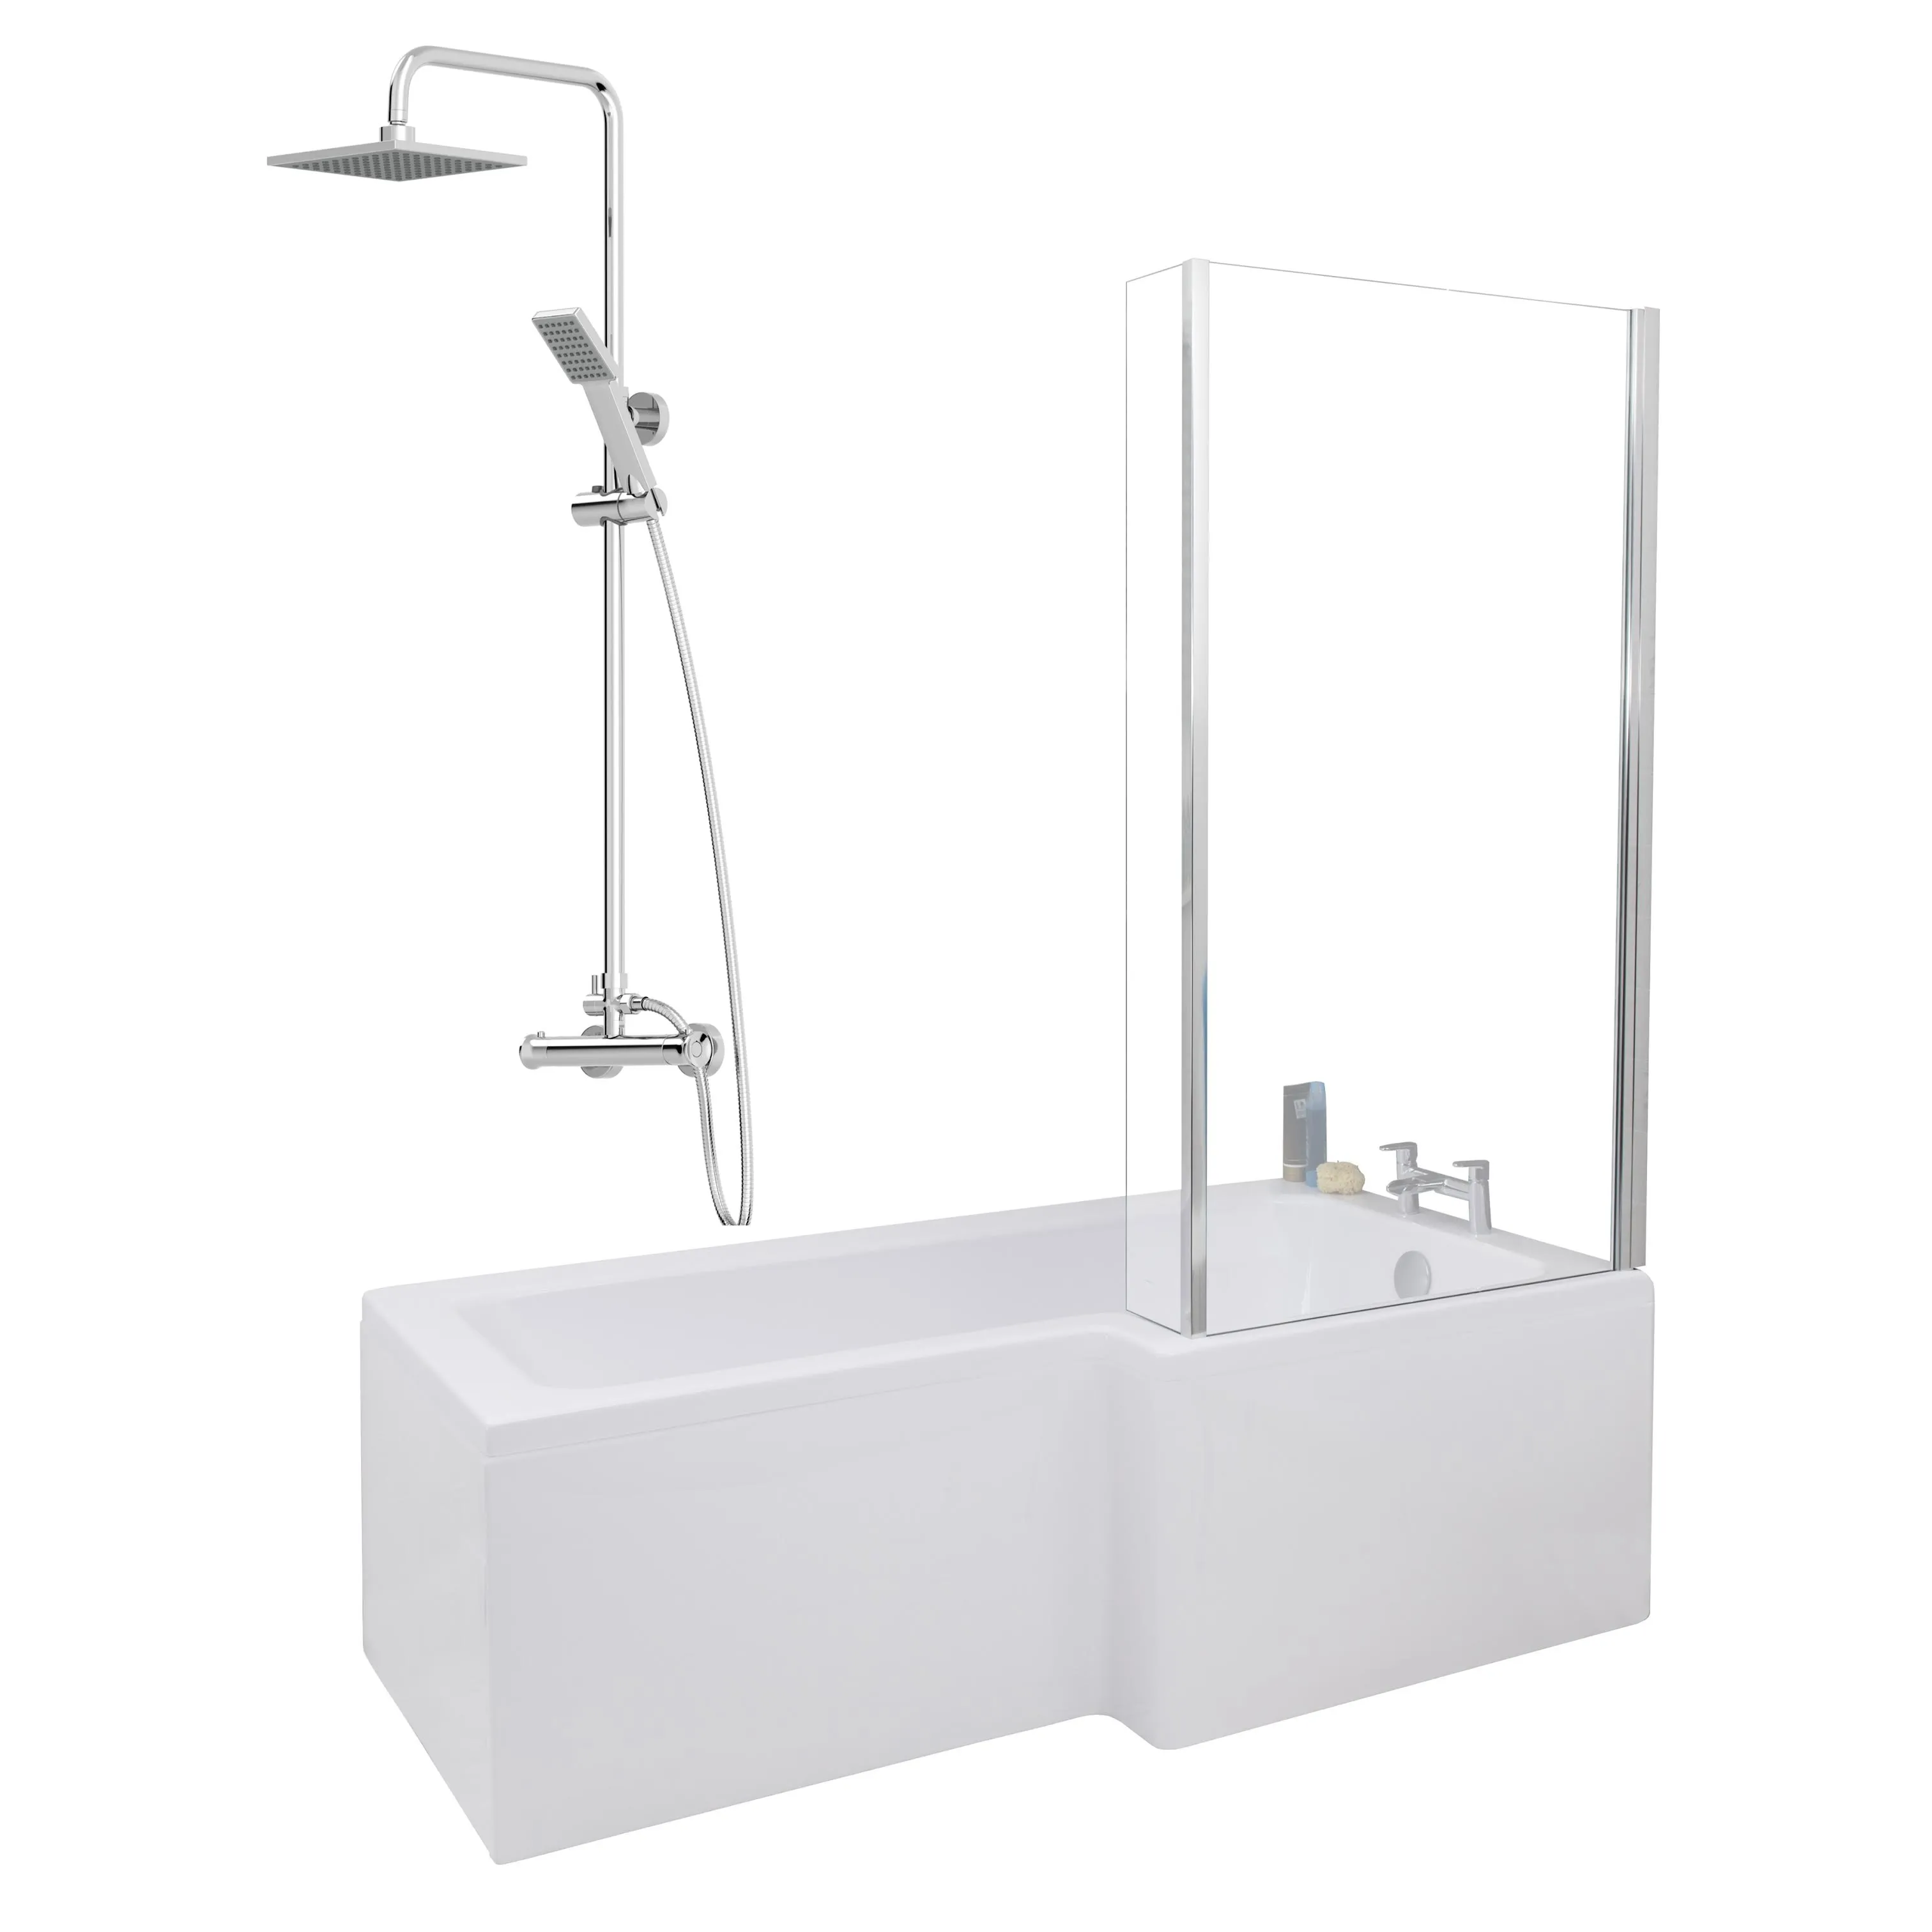 Ceramica L 1700 Right Shower Bath With Chrome Square Thermostatic Mixer Shower & Side Panel